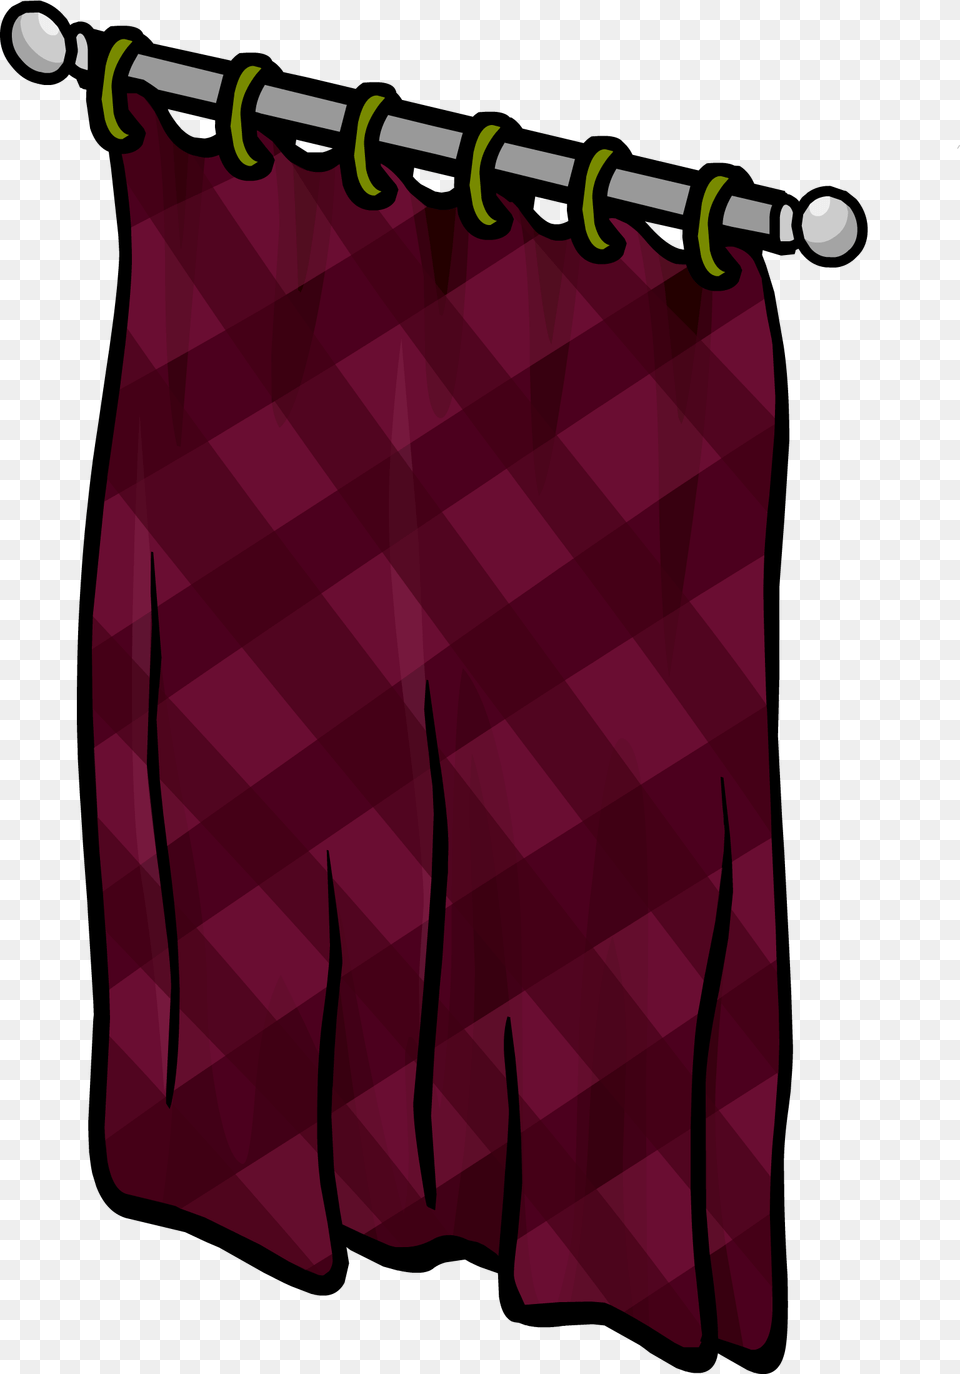 Burgundy Curtains Sprite 007 Curtain, Smoke Pipe, Clothing, Skirt Png